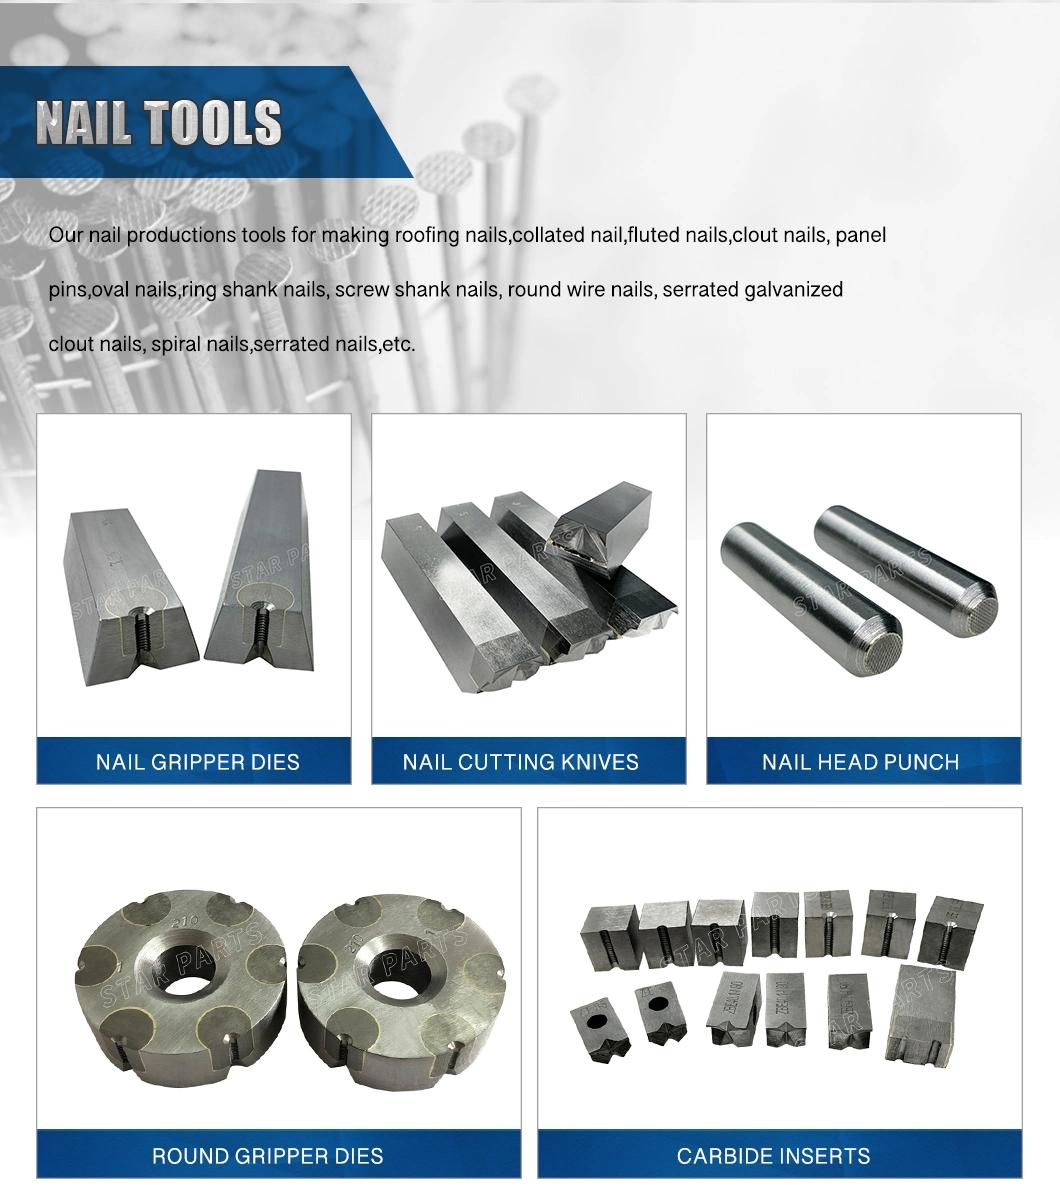 Tungsten Carbide Wire Nail Tools for Nail Making Industry